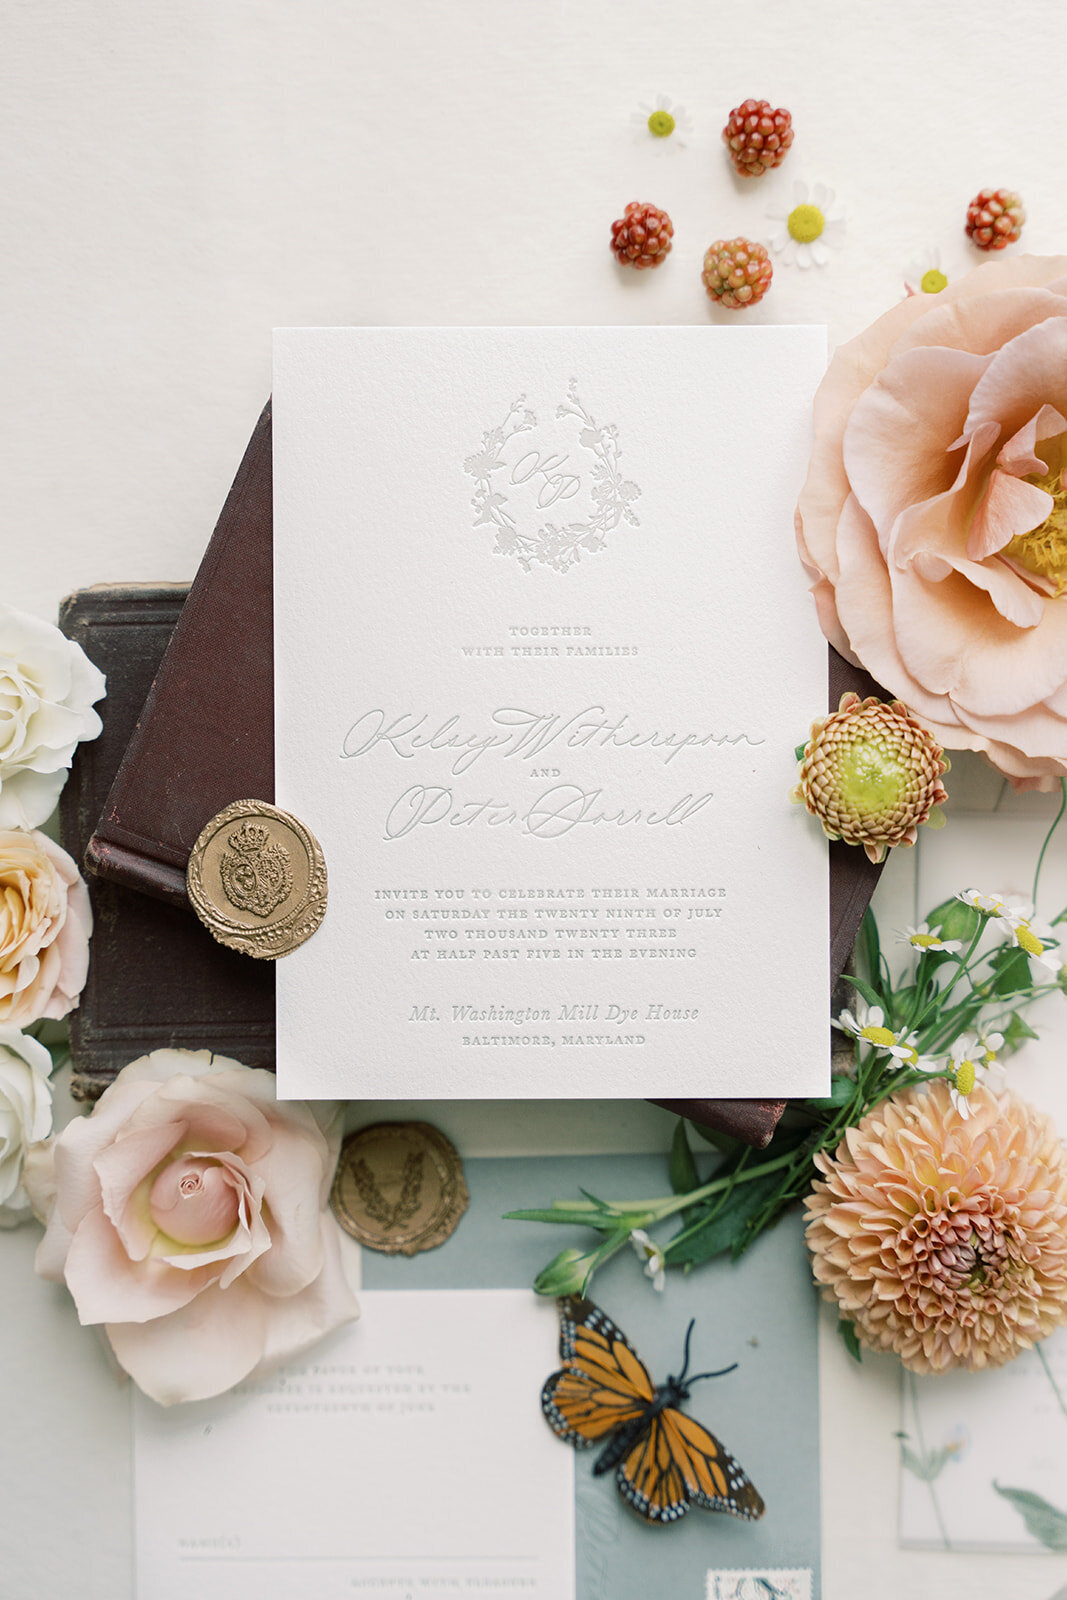 Flat lay invitation with floral accents such as peach dahlias, blush and peach garden roses and daisies.